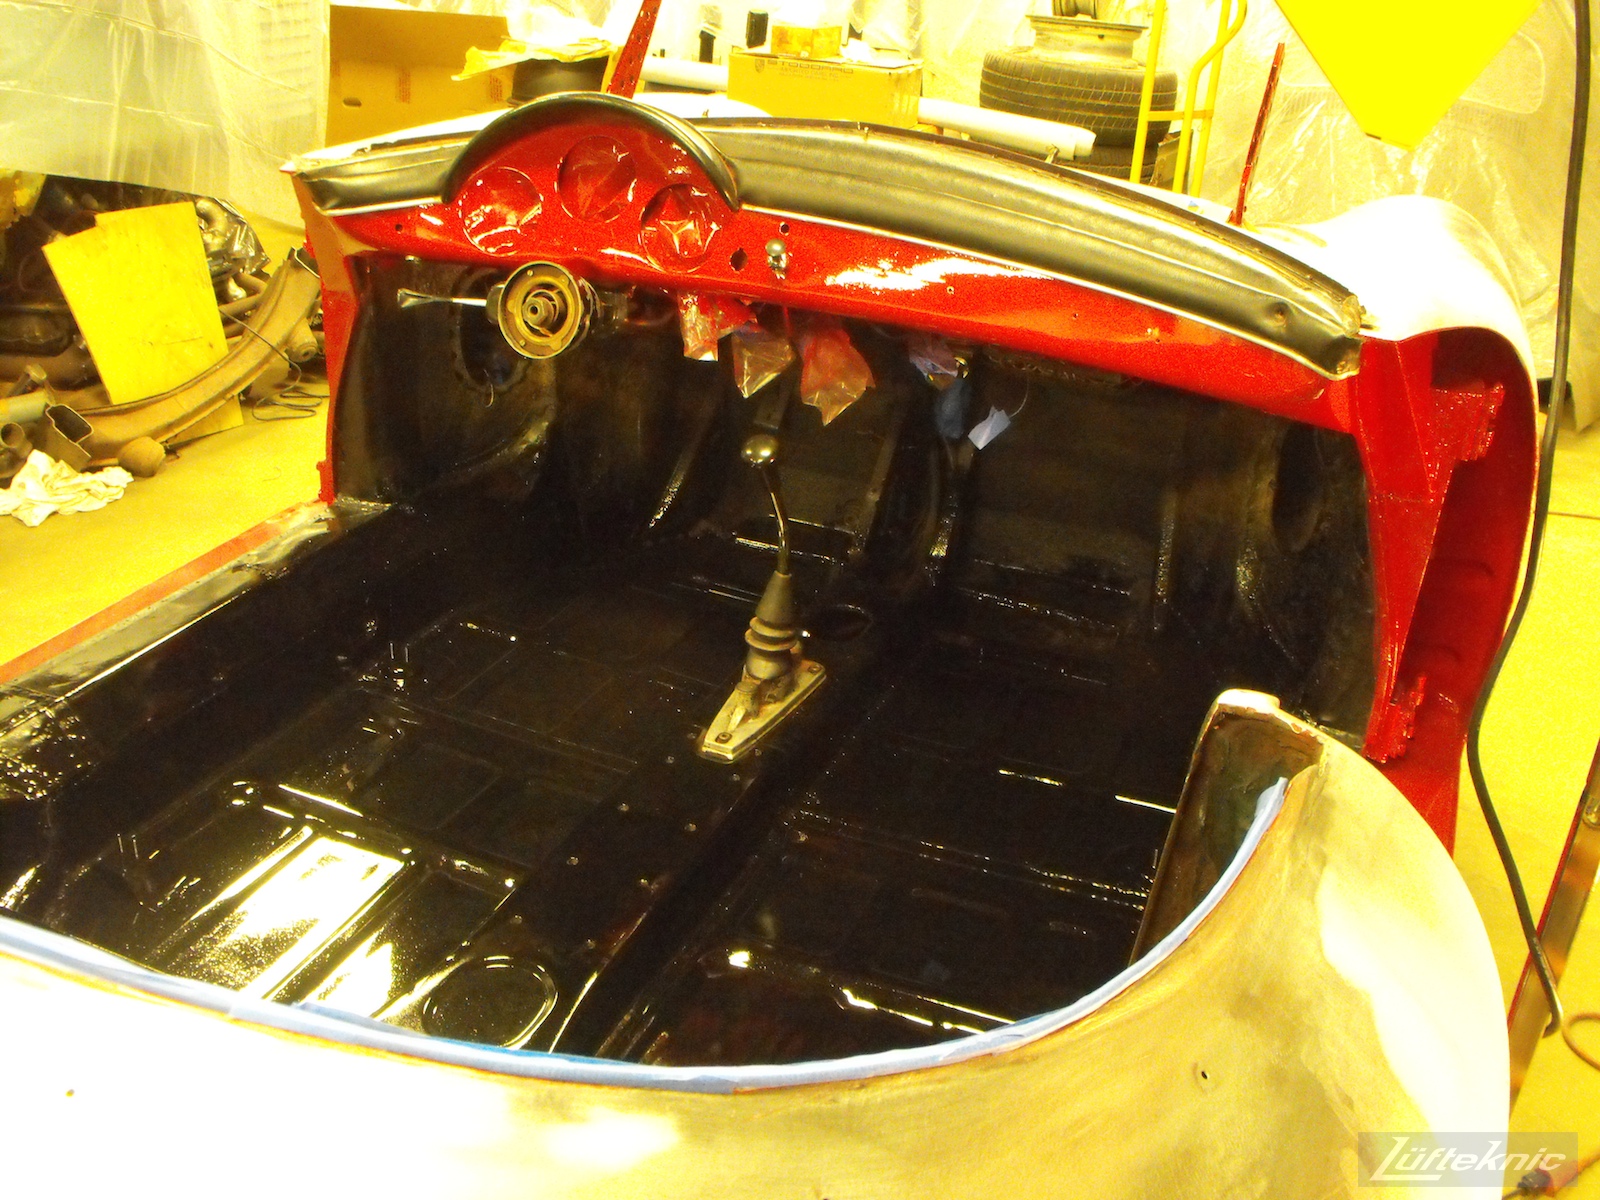 Painted dash and interior on a 1961 Porsche 356B Roadster restoration.